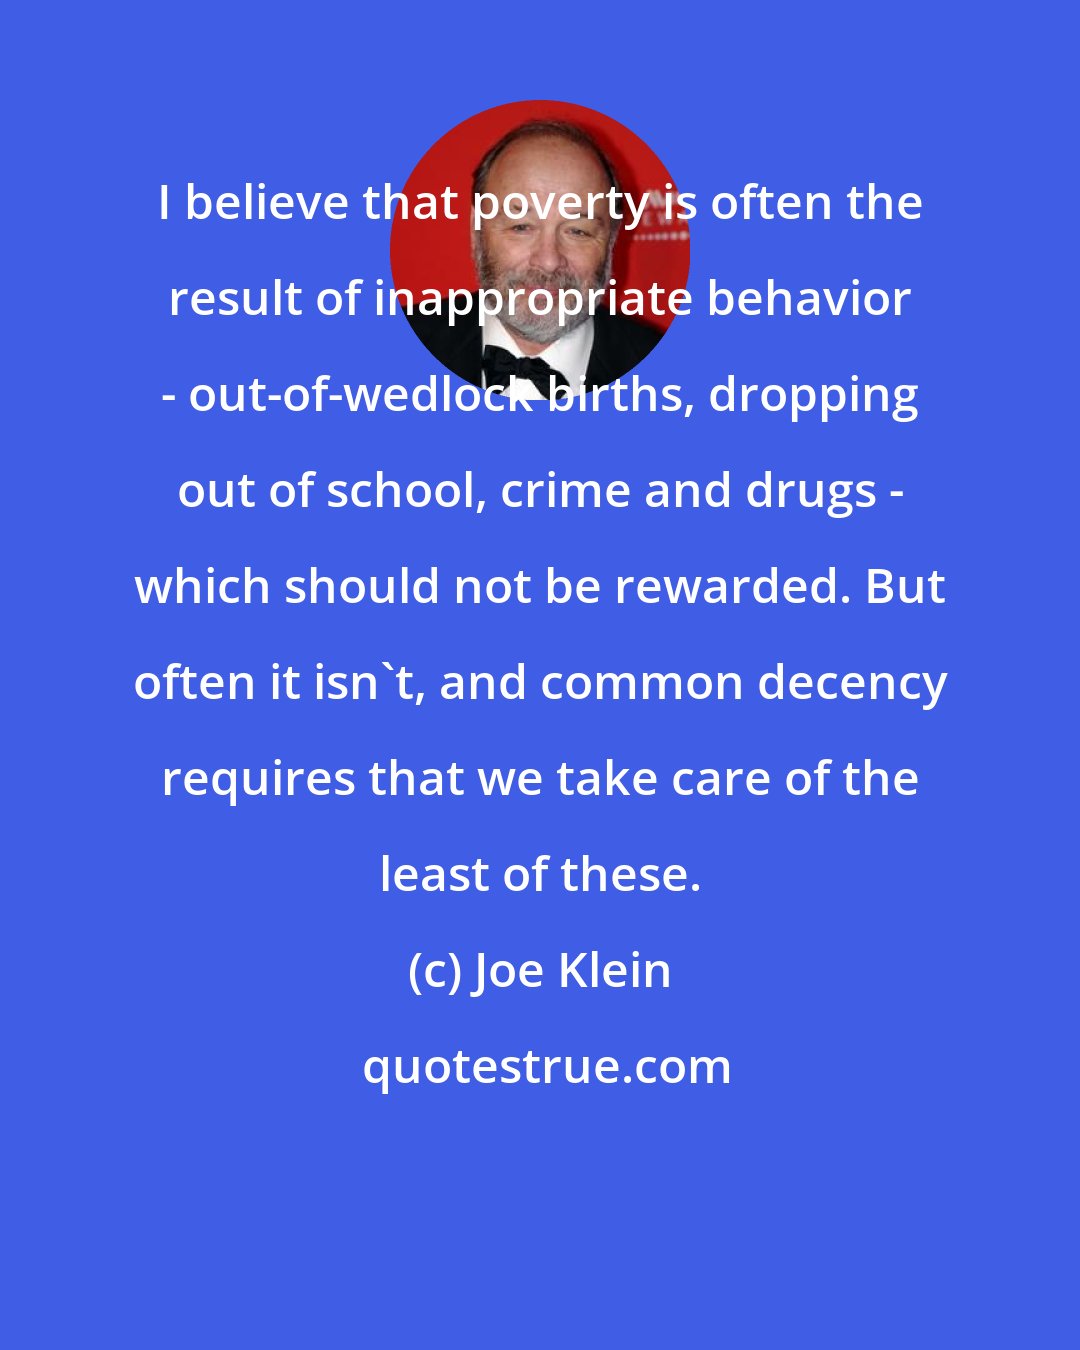 Joe Klein: I believe that poverty is often the result of inappropriate behavior - out-of-wedlock births, dropping out of school, crime and drugs - which should not be rewarded. But often it isn't, and common decency requires that we take care of the least of these.